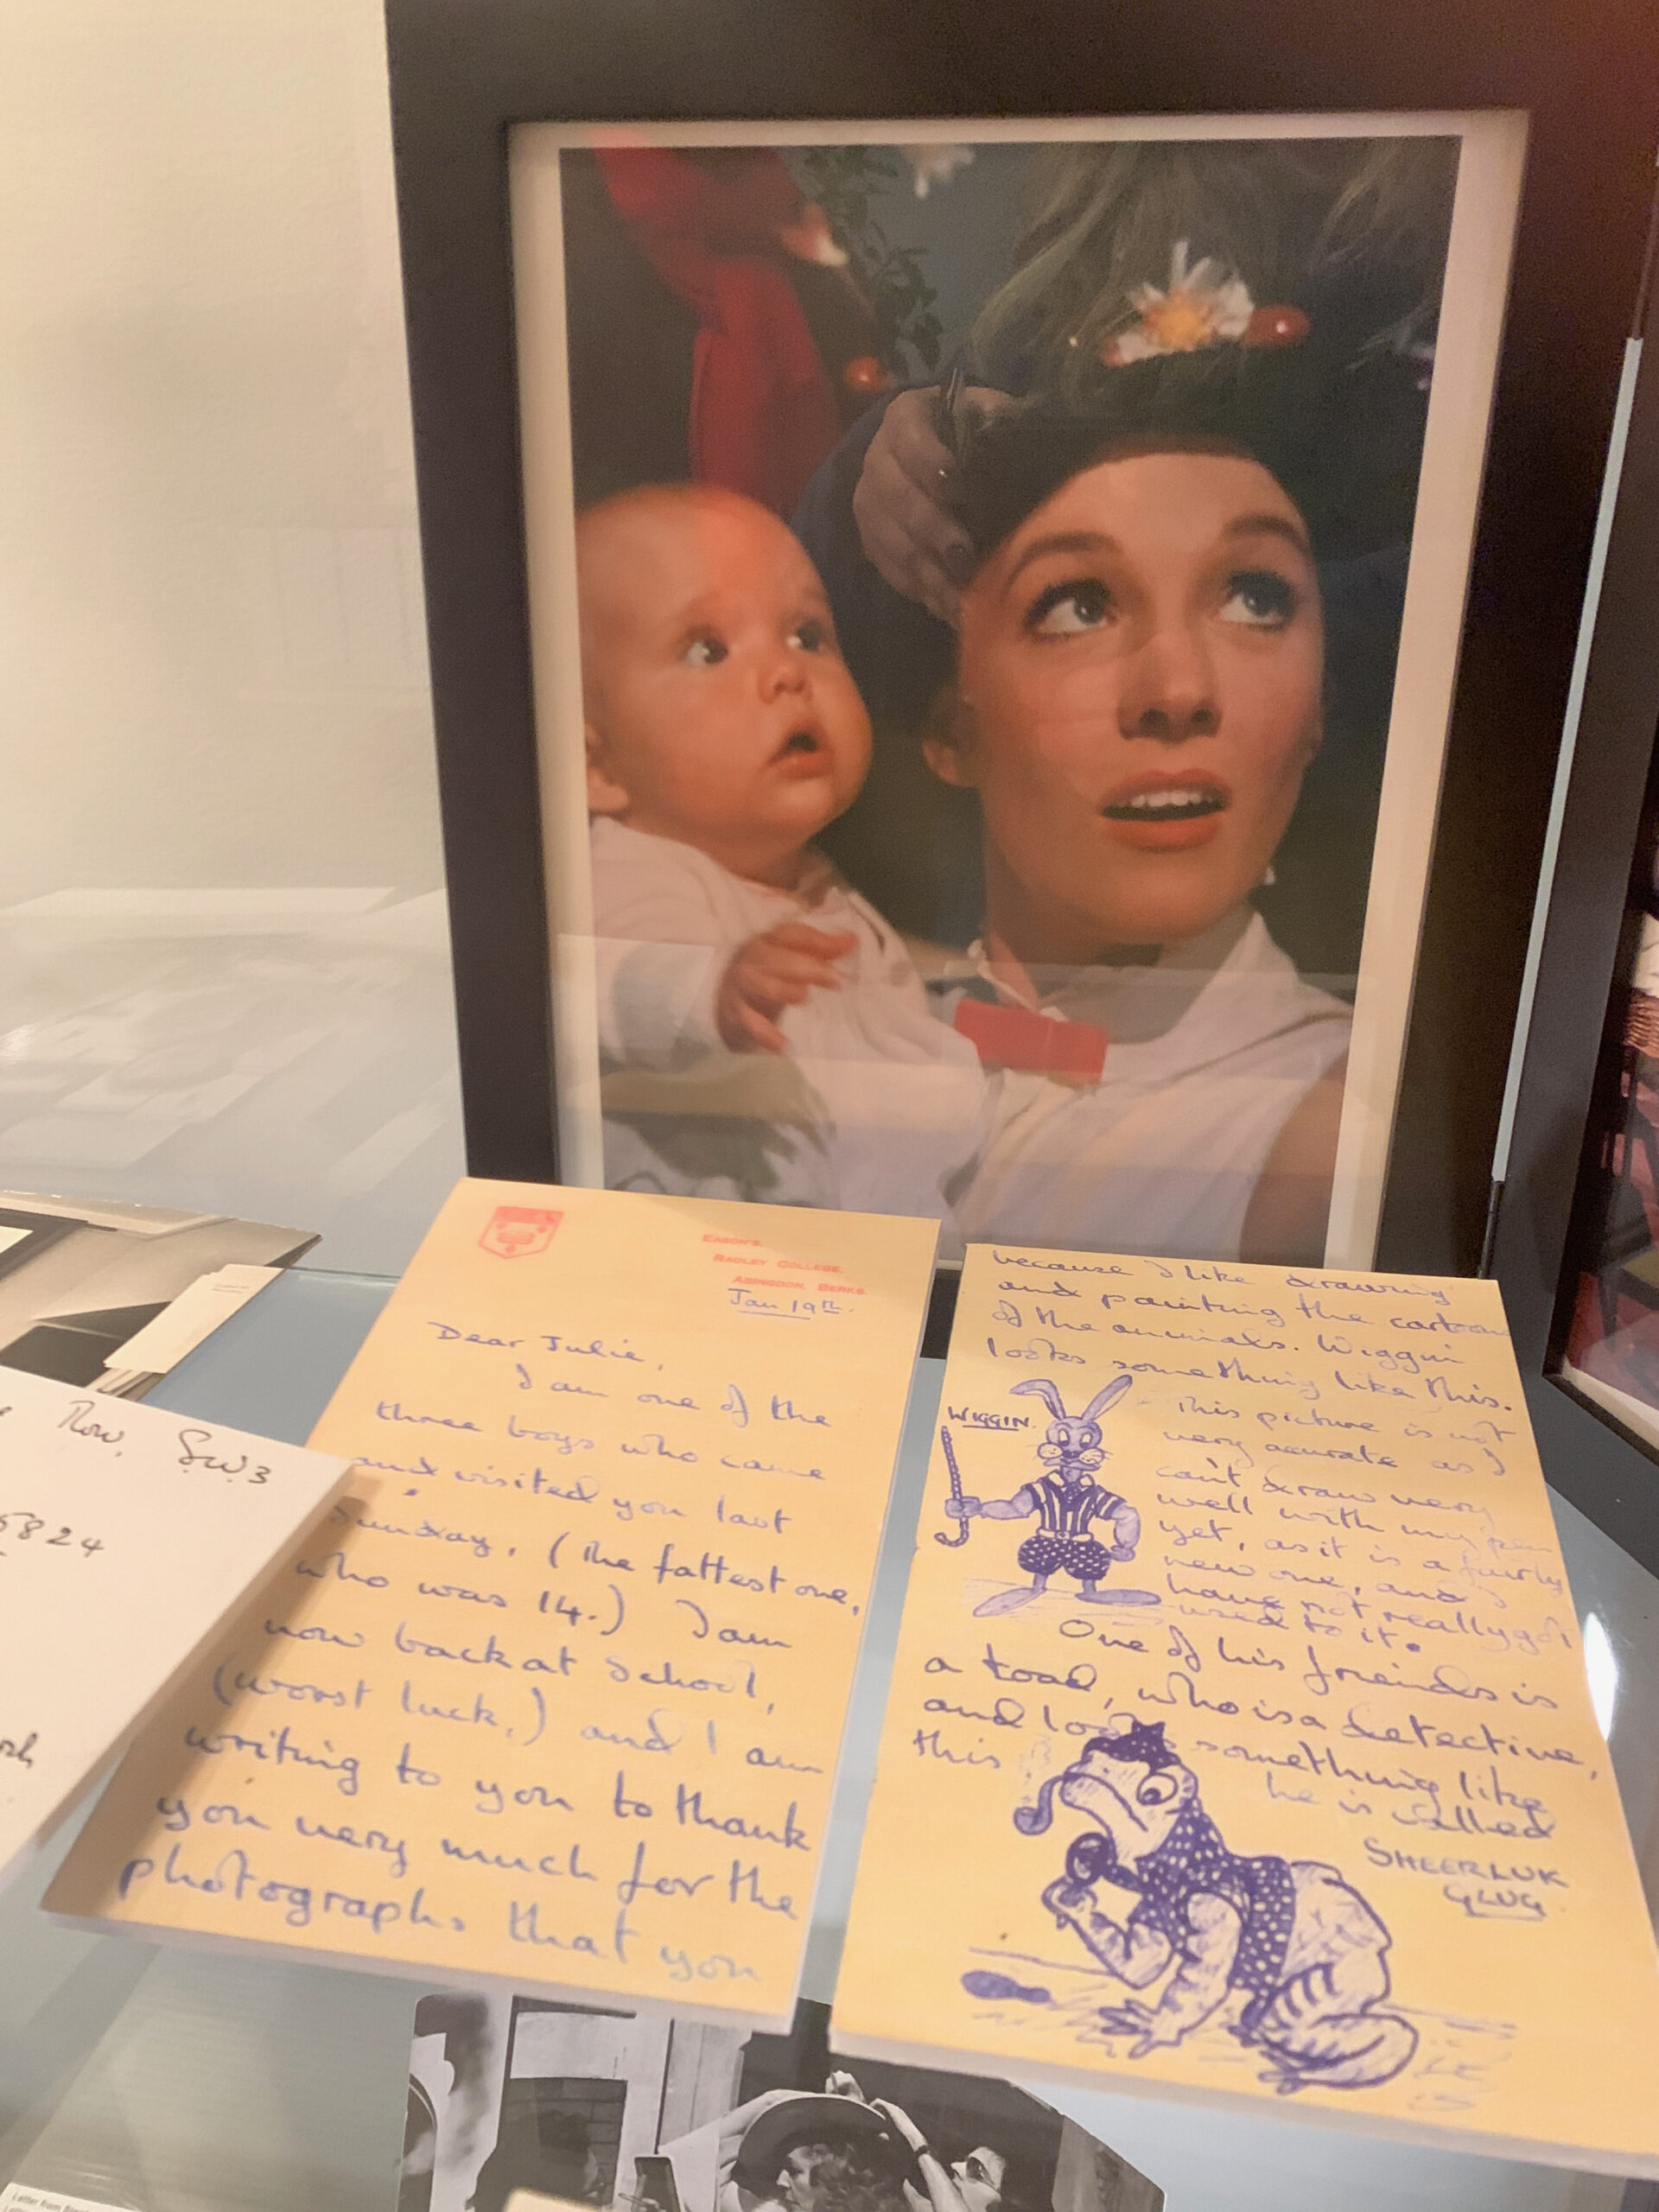 Emma Walton Hamilton with her mother Julie Andrews during production of Mary Poppins. The photo is on view in 